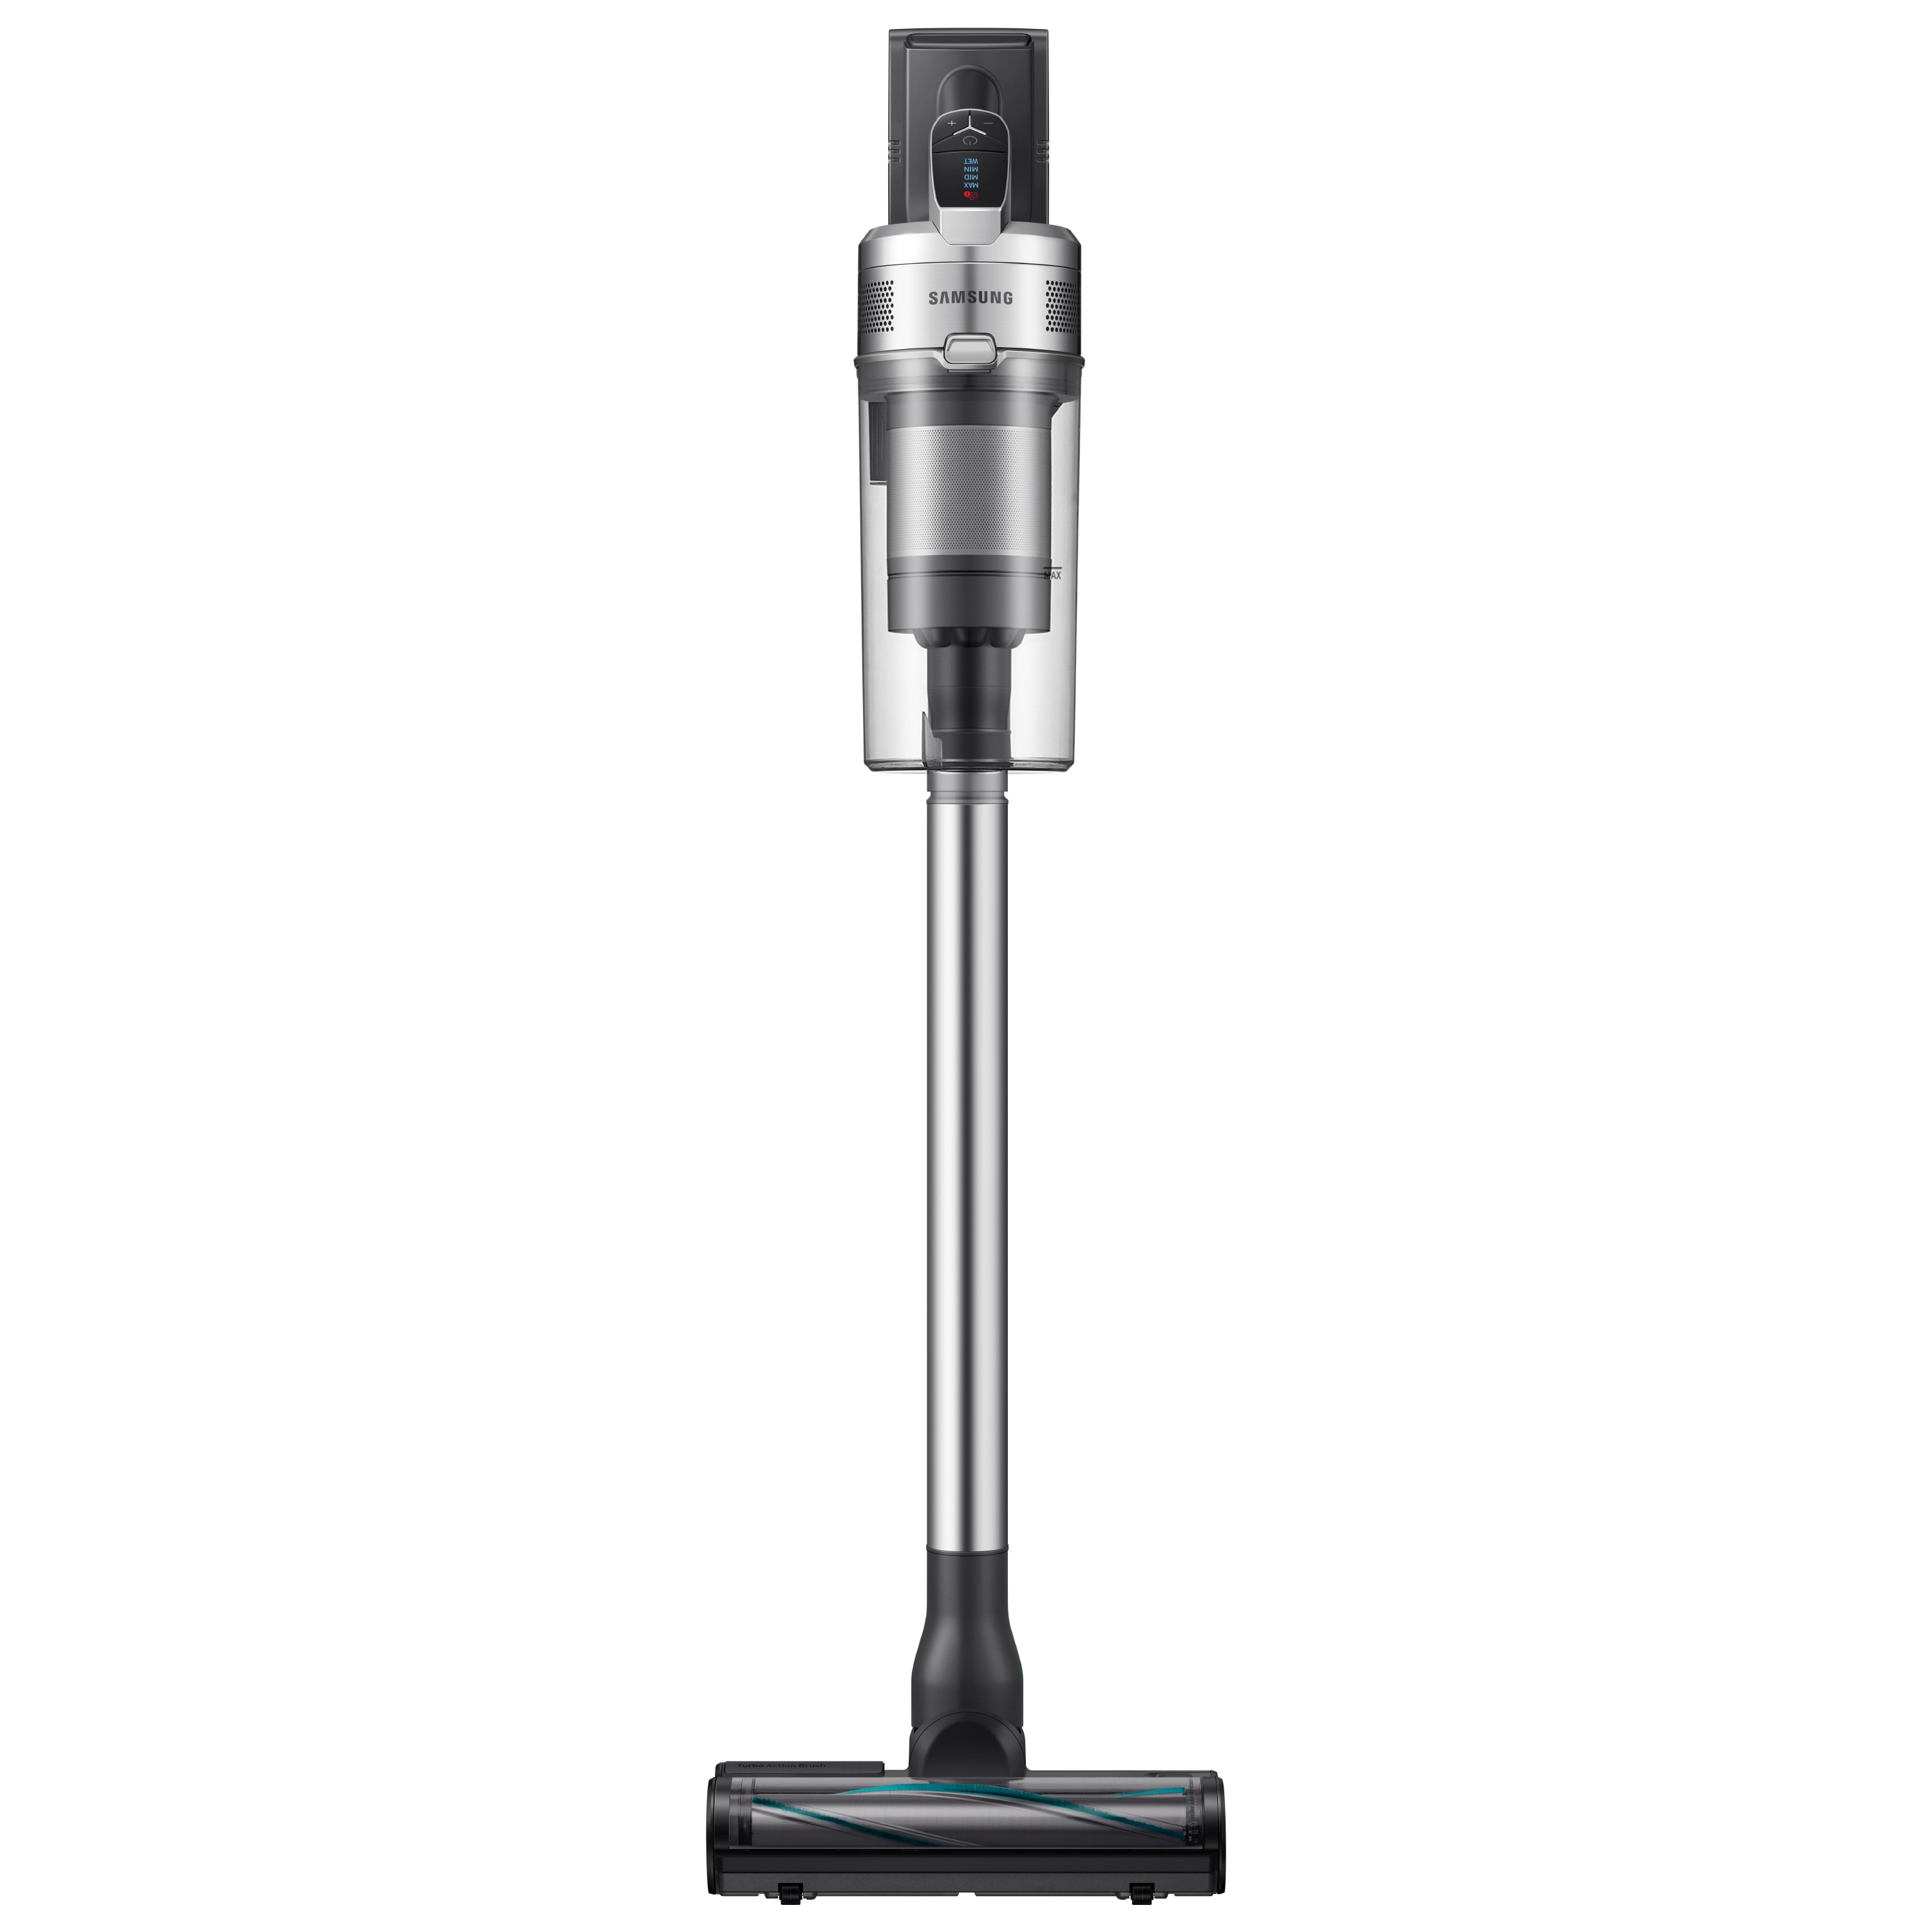 Samsung Jet 90 and Clean Pet in Stick To Vacuums at Stick Bundle 21.9 Volt the Cordless Handheld) Vacuum department (Convertible Station